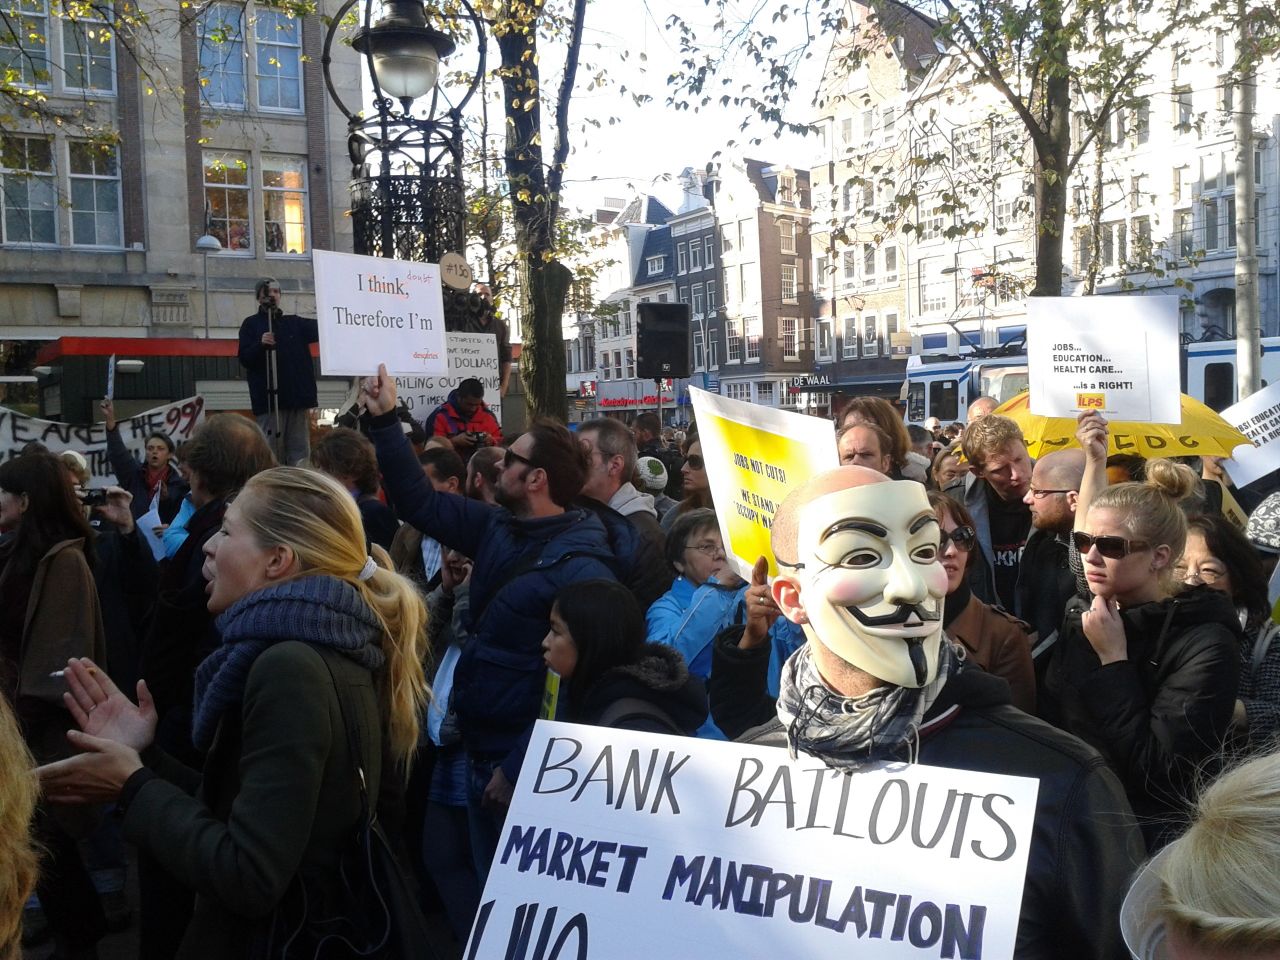 More than 2,000 people protested in Amsterdam on Saturday, iReport contributor Sarah Matson said.